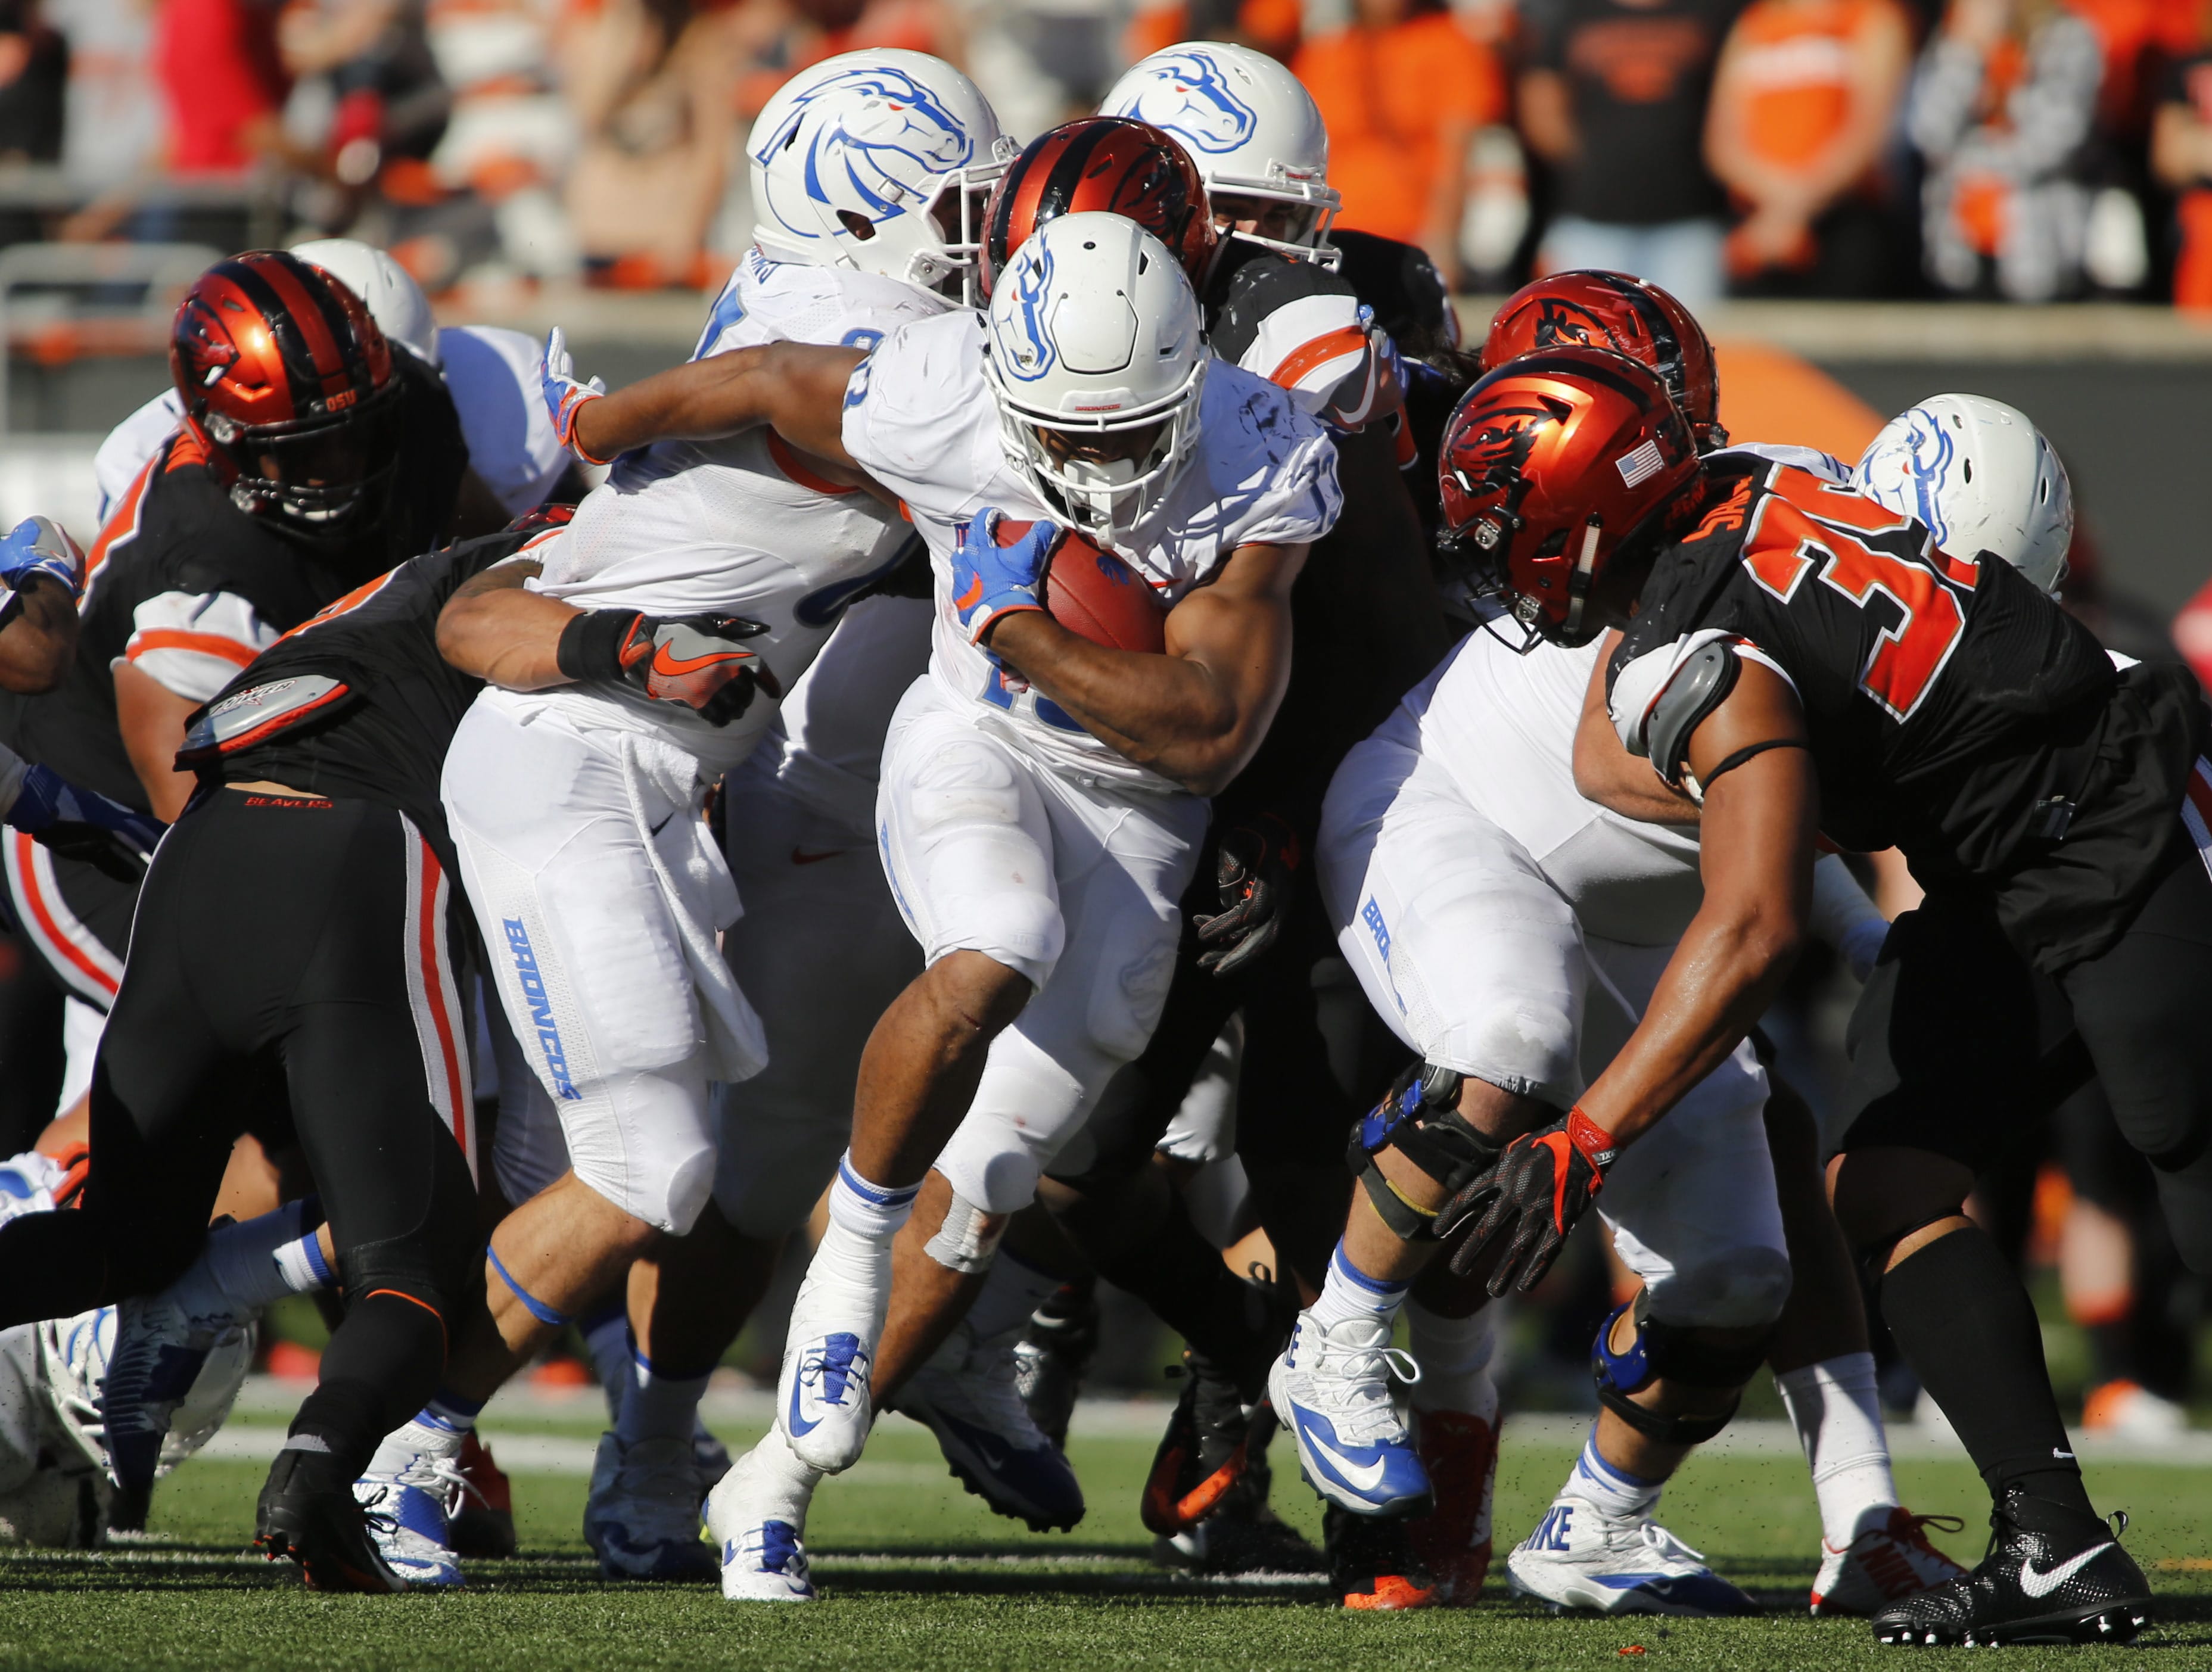 Boise State running back Jeremy McNichols, center, bulls his way through the Oregon State defense in the second half of an NCAA college football game in Corvallis, Ore., on Saturday, Sept. 24, 2016. Boise State won 38-24. (AP Photo/Timothy J.